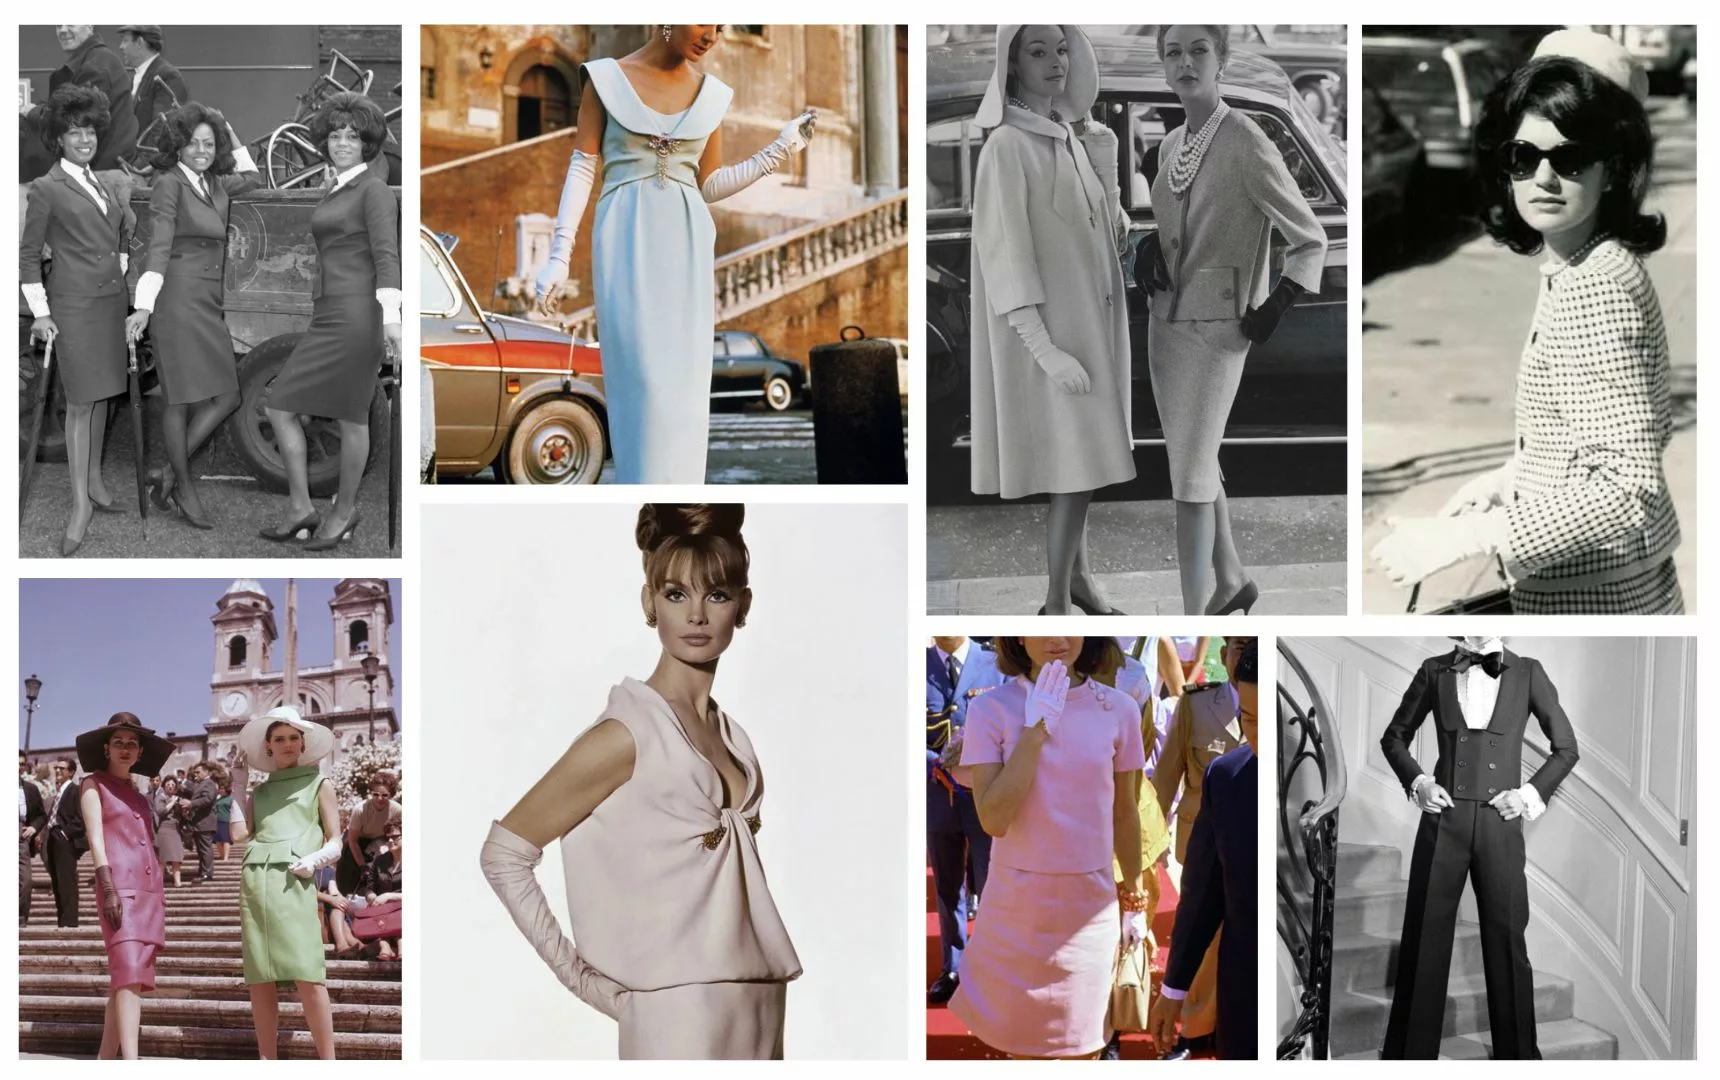 Your guide to 1960s Revival fashion